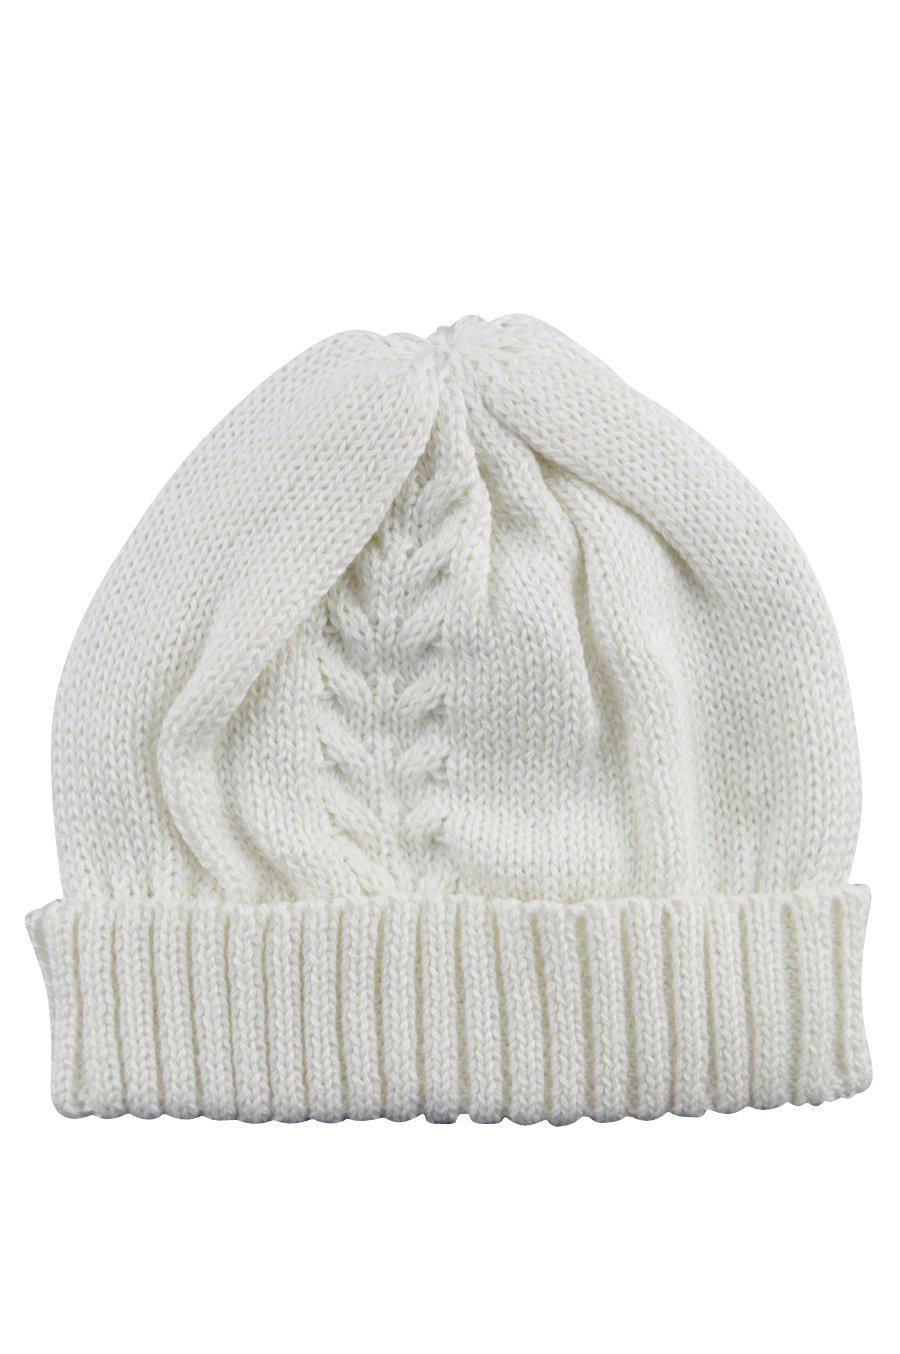 Ivory Knitted Hat - Little Threads Inc. Children's Clothing